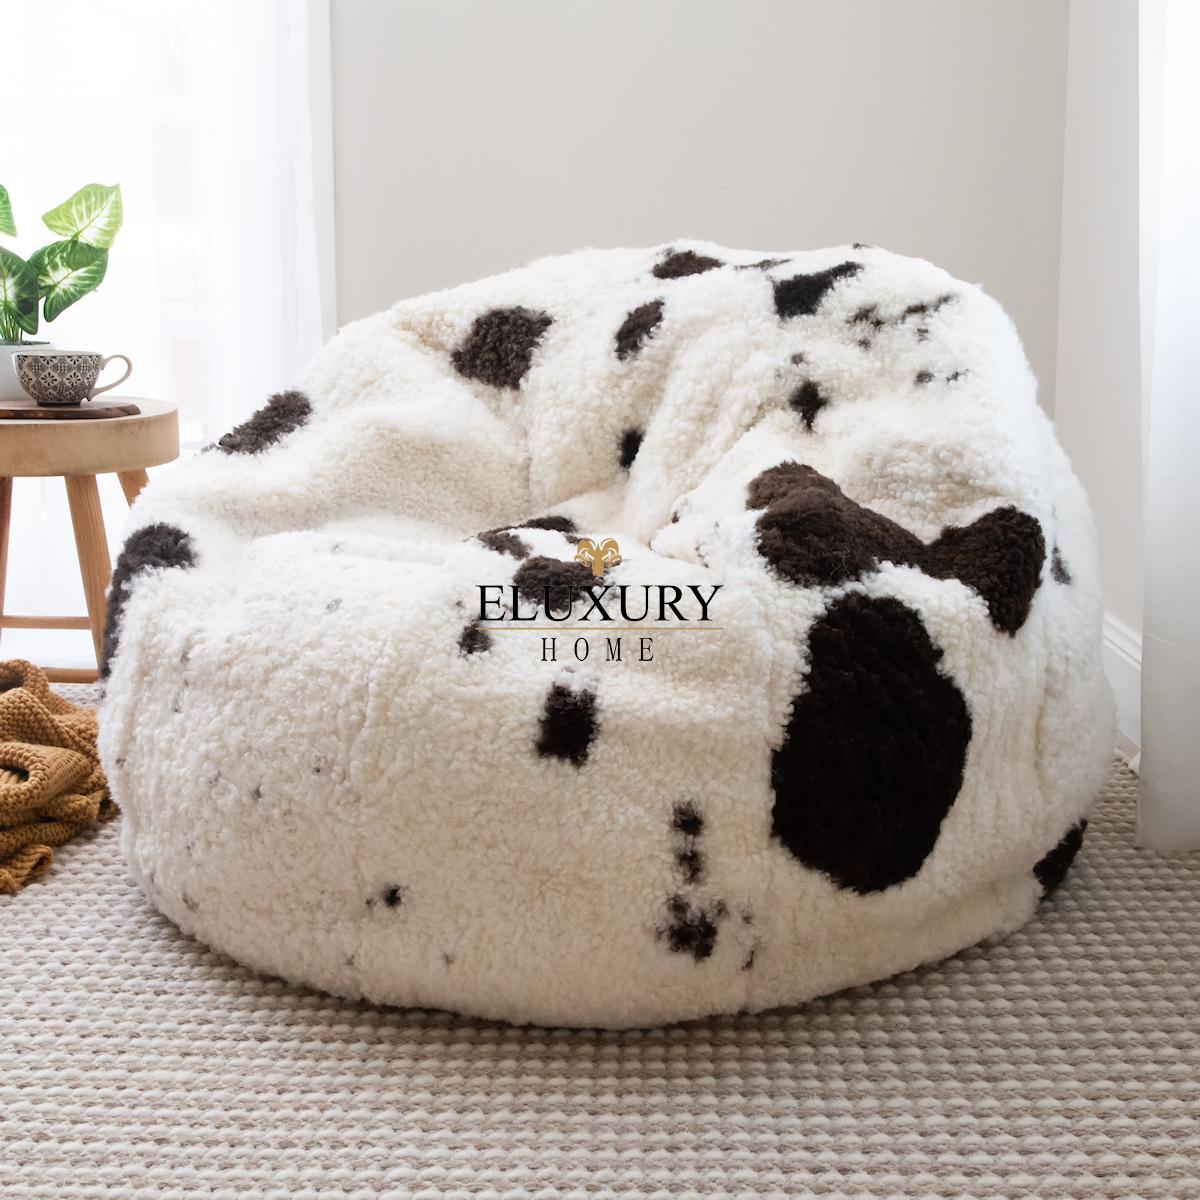 Limited Edition shearling sheepskin bean bag chair with fill. A beautiful short curly wool shearling with natural dark brown spots that are each personally pre-matched and personally selected to create this one-of-a-kind-piece.

The sheepskin wool